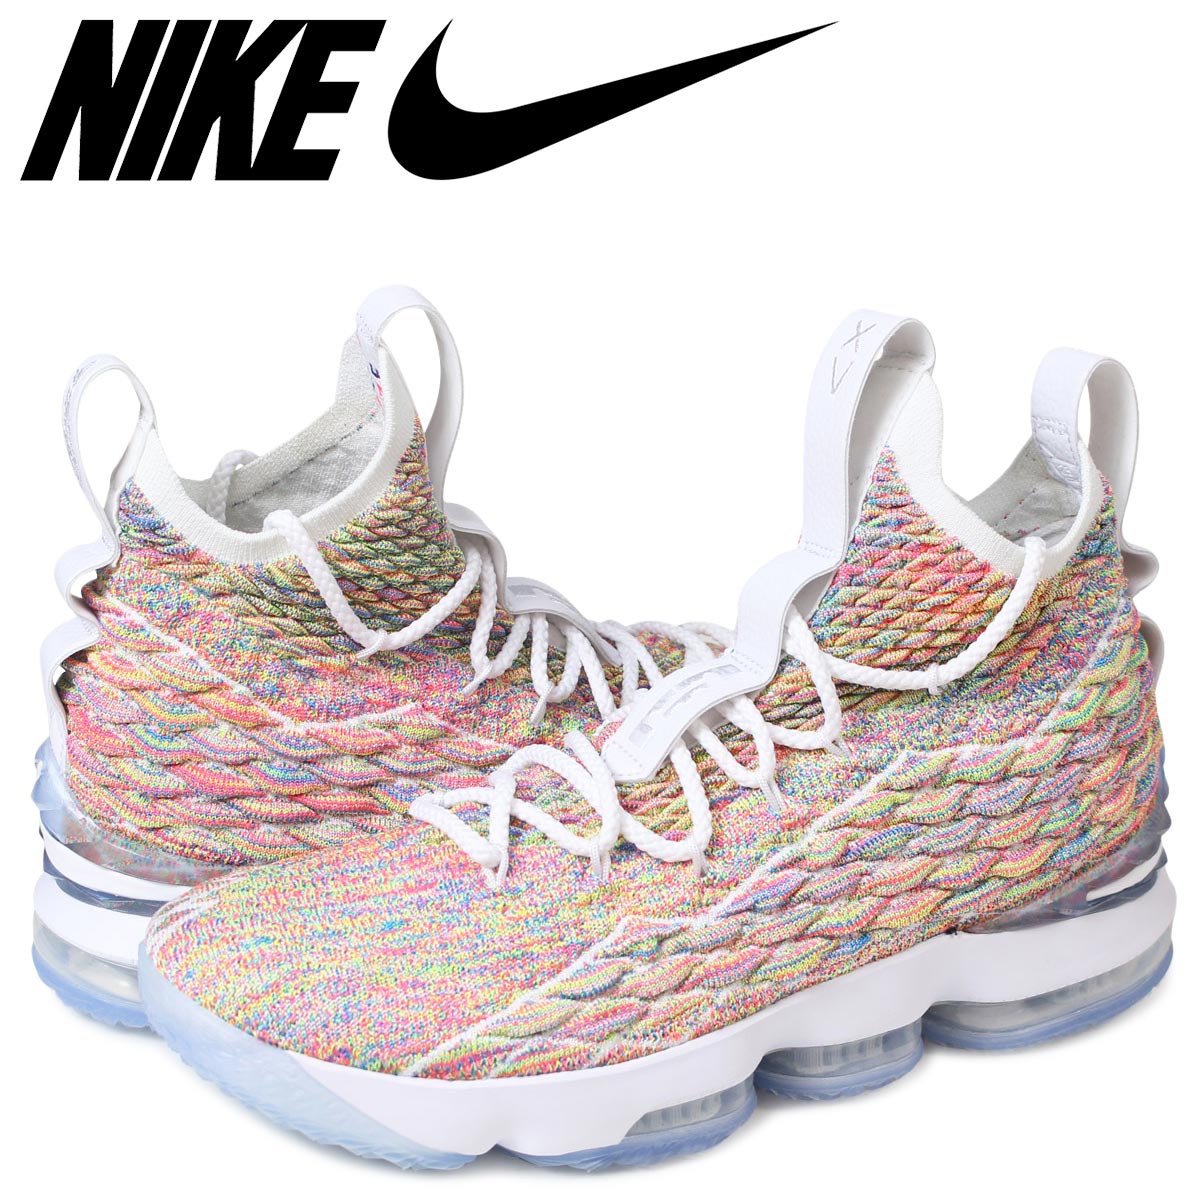 lebron 15 cereal